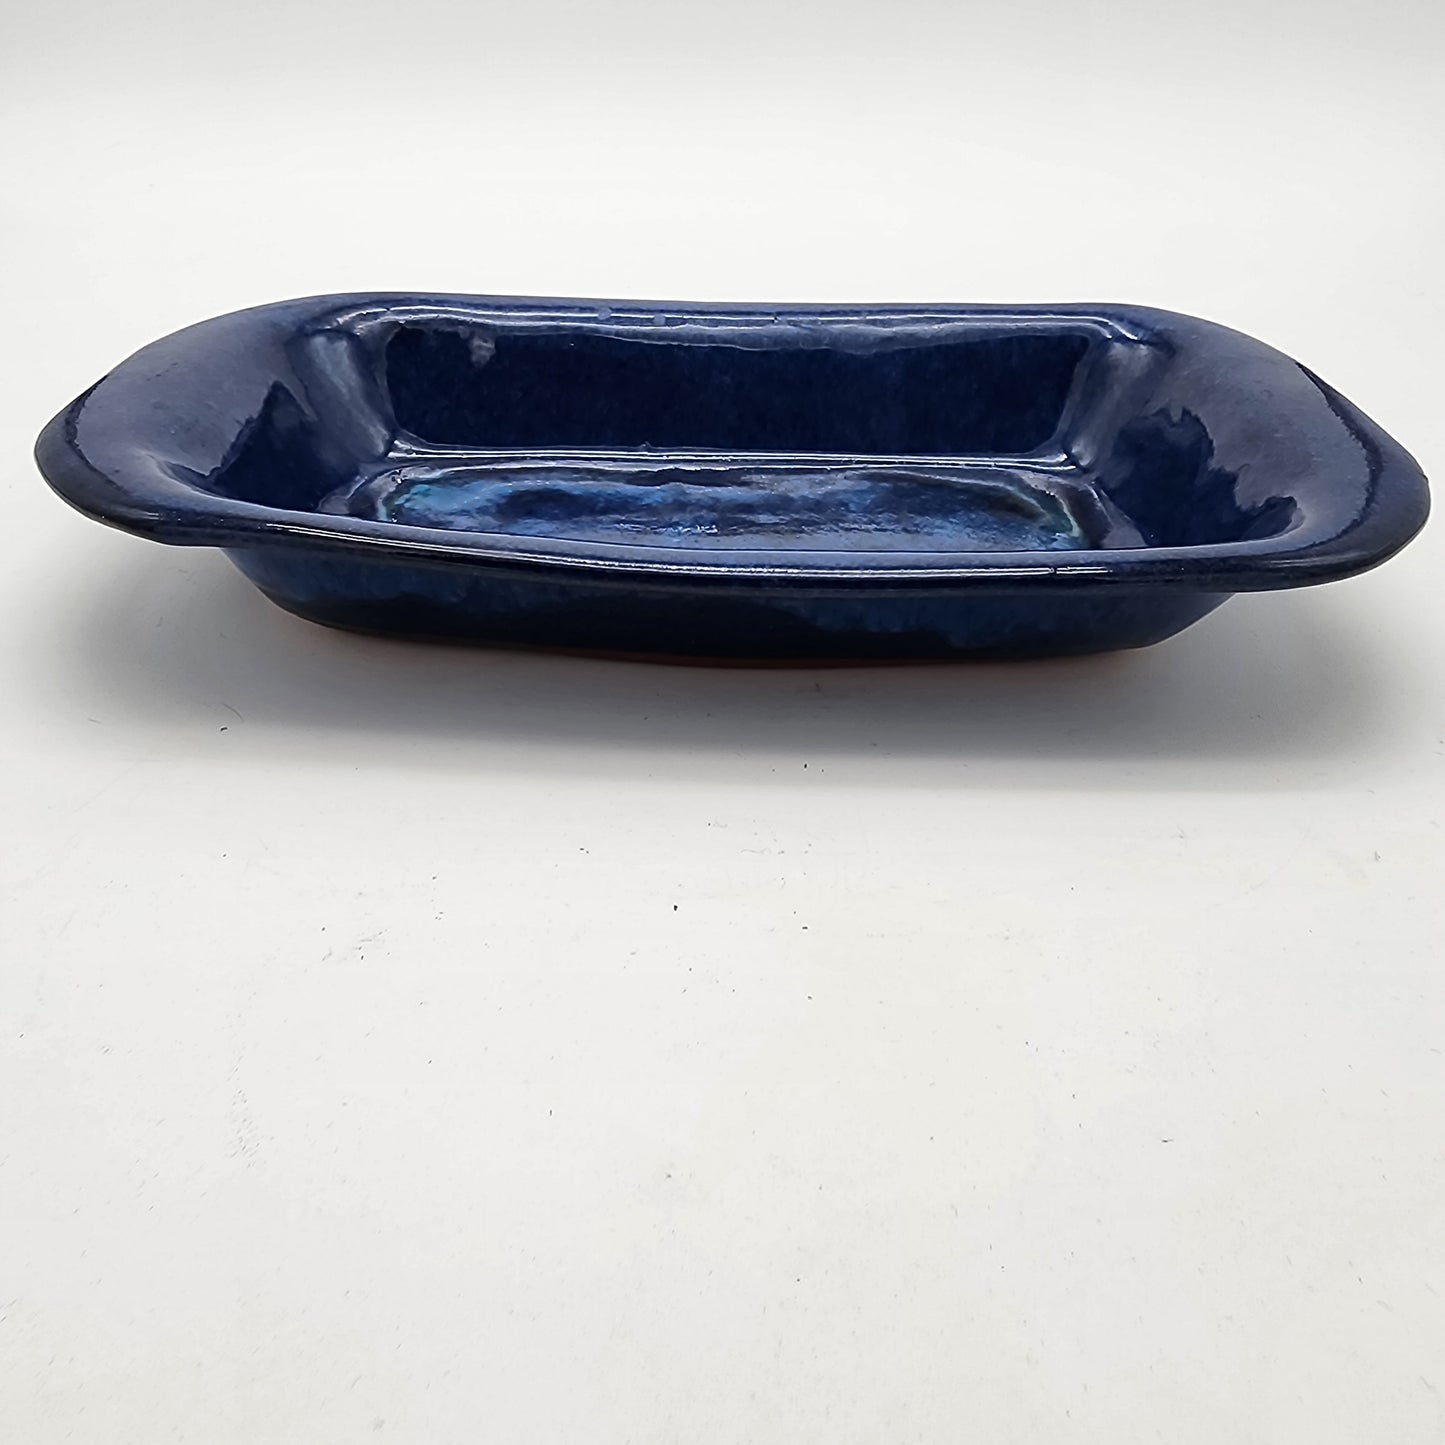 Bob Nuthouse Blue Pottery Baking or Serving Dish 2